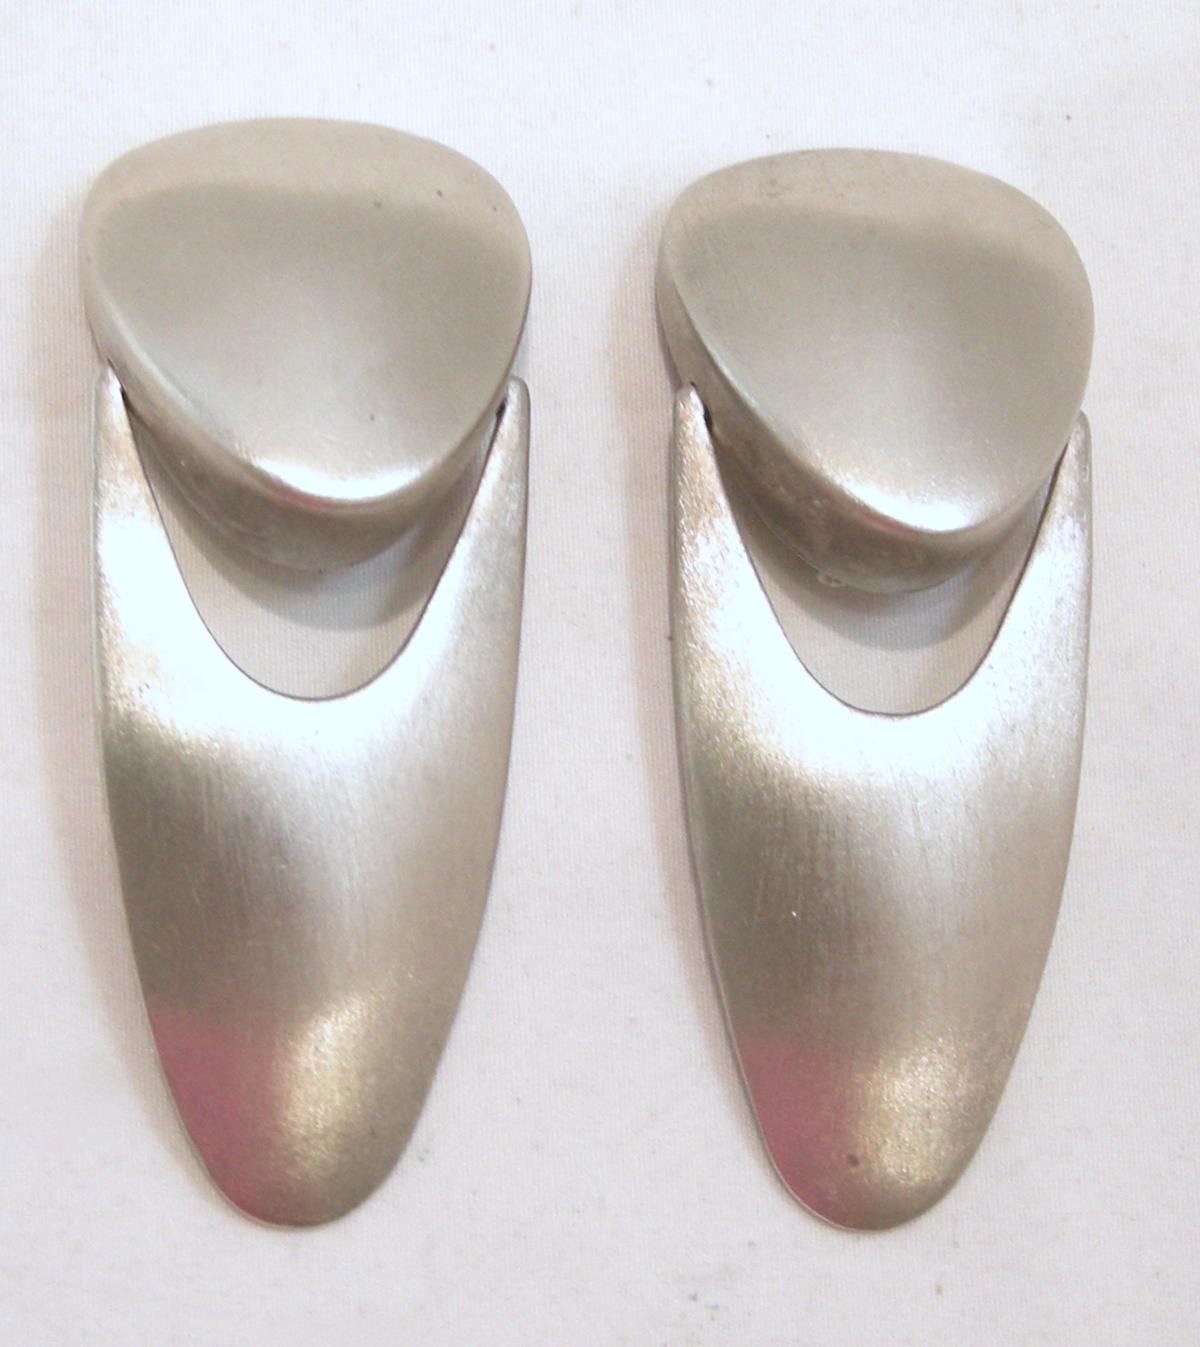 These long vintage 1970s earrings feature a modernist design with a triangular shape top earpiece and attached drop, all in a matte-finish silver-tone setting.  In excellent condition, these clip earrings measure 2-7/8” x 1-1/8”.